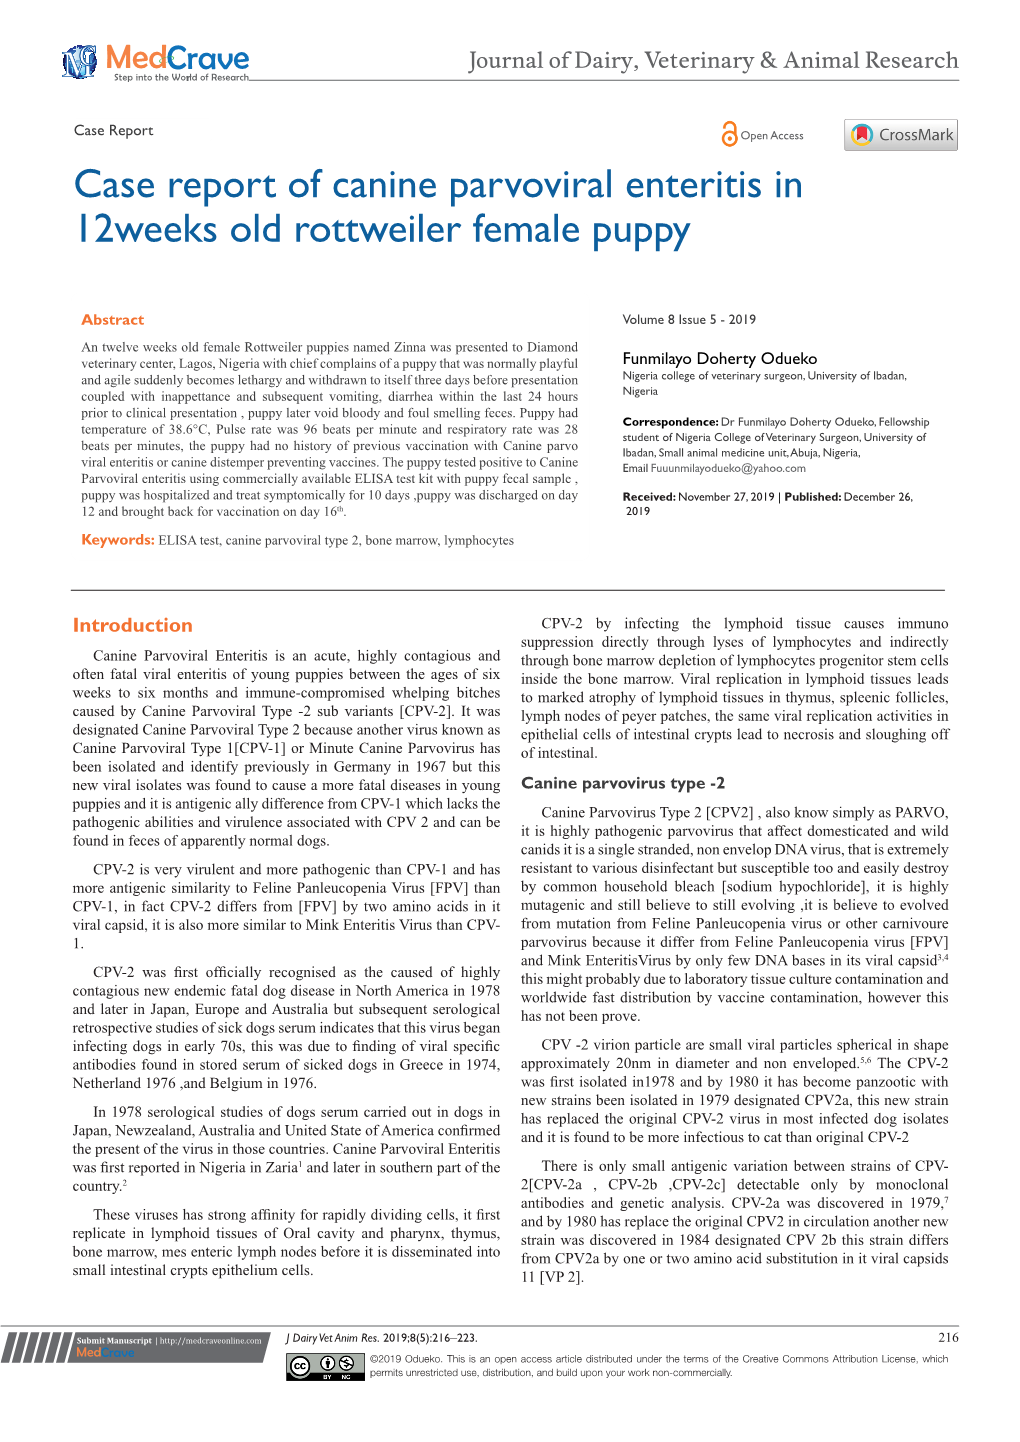 Case Report of Canine Parvoviral Enteritis in 12Weeks Old Rottweiler Female Puppy